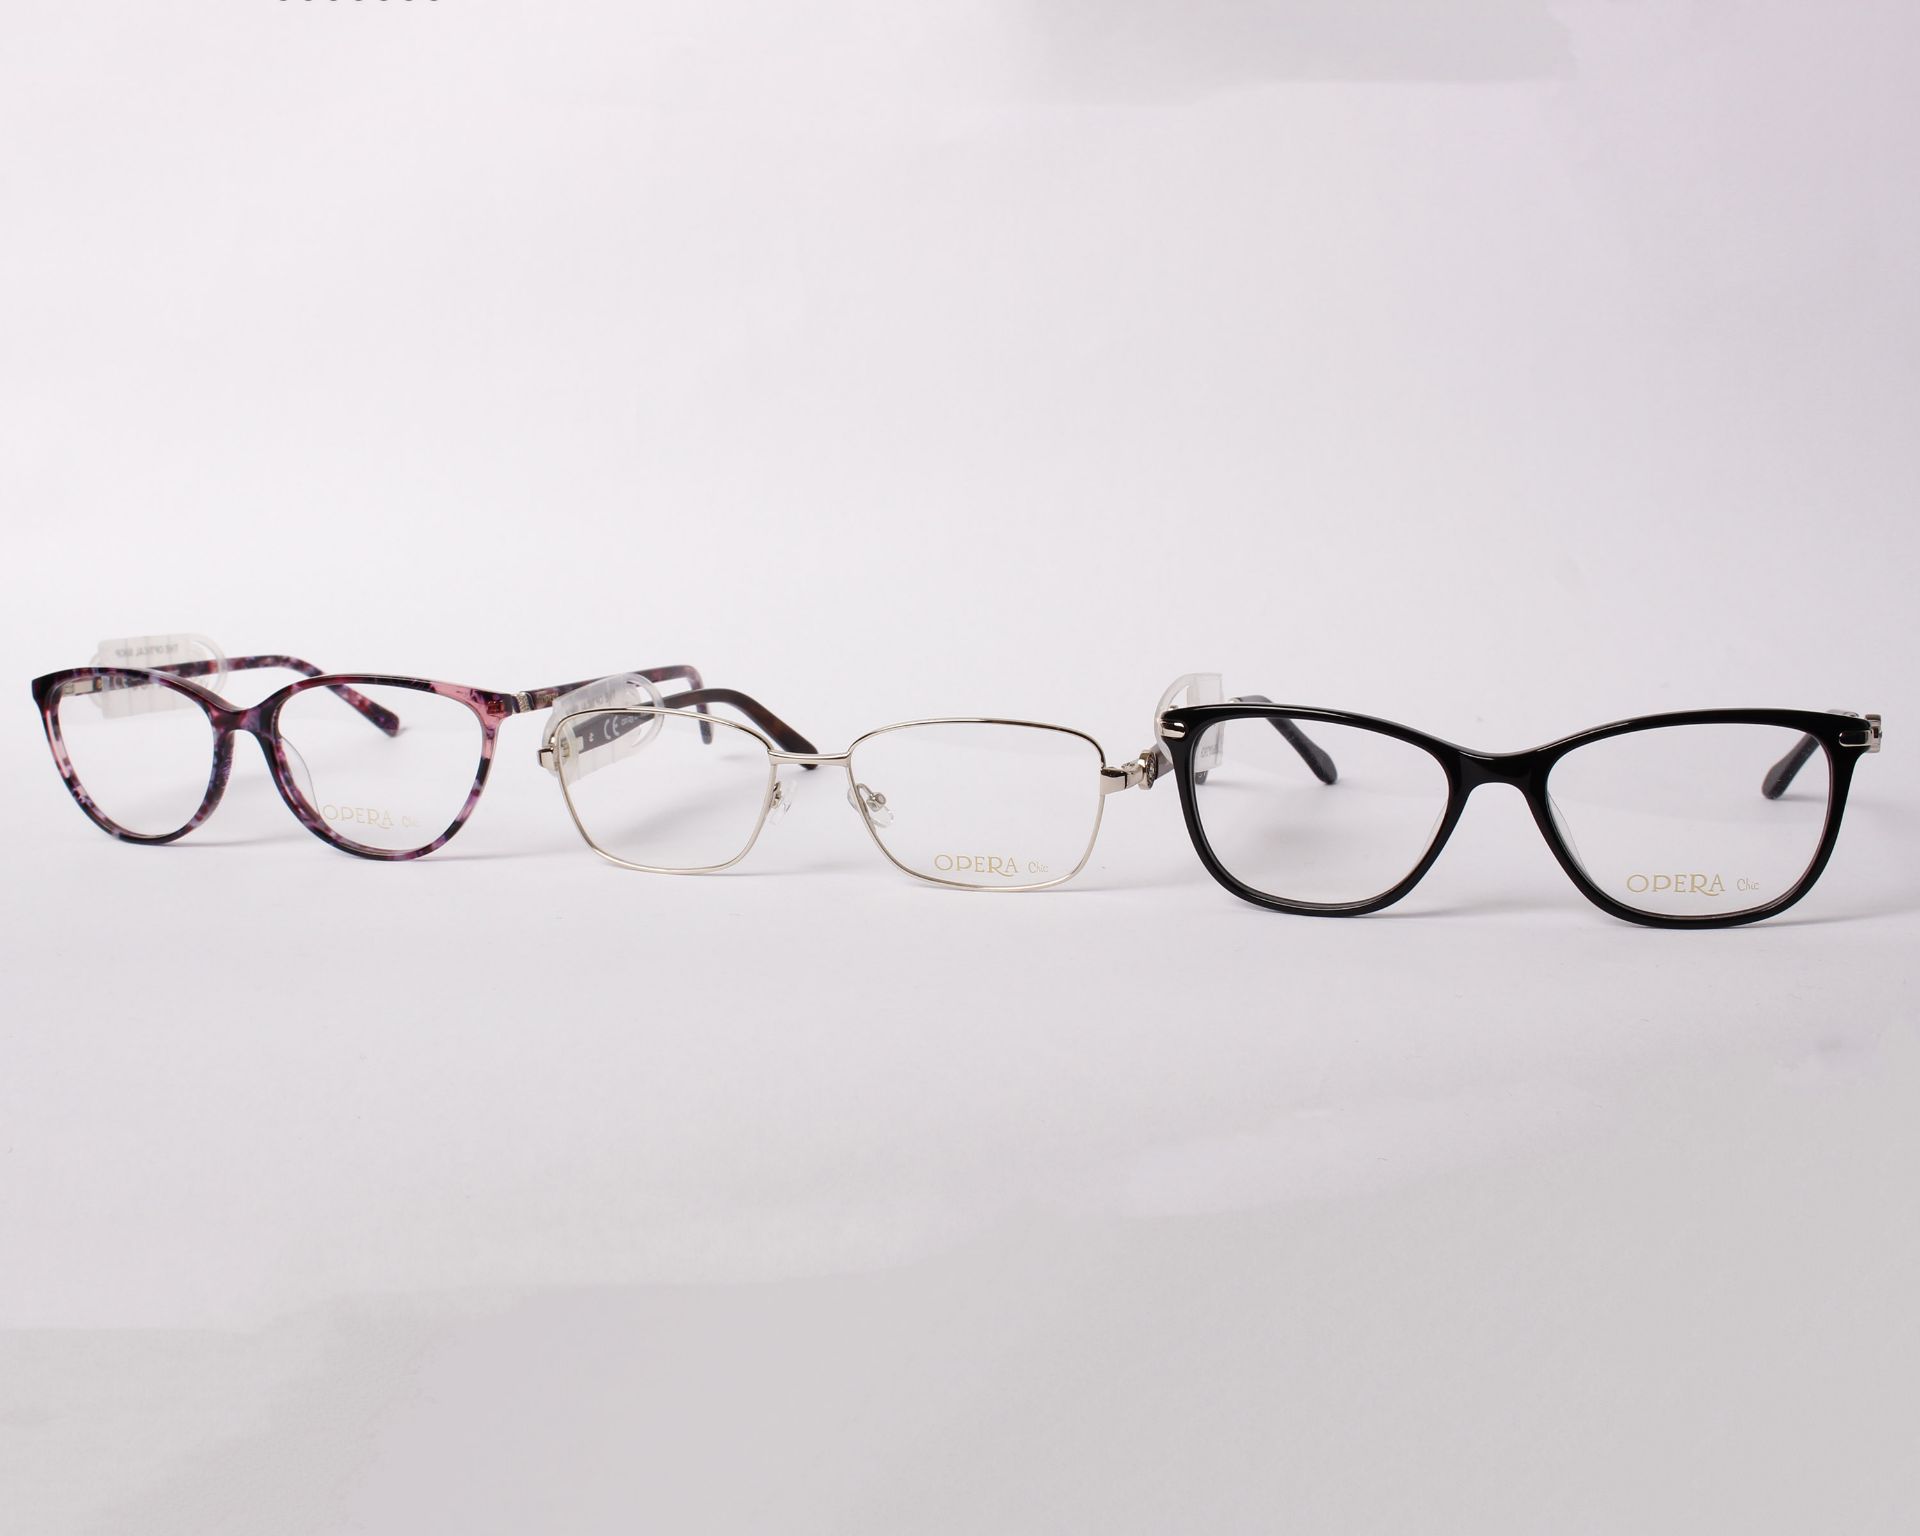 Three pairs of as new Opera glasses frames with clear glass (RRP £110 and £130). - Image 3 of 3